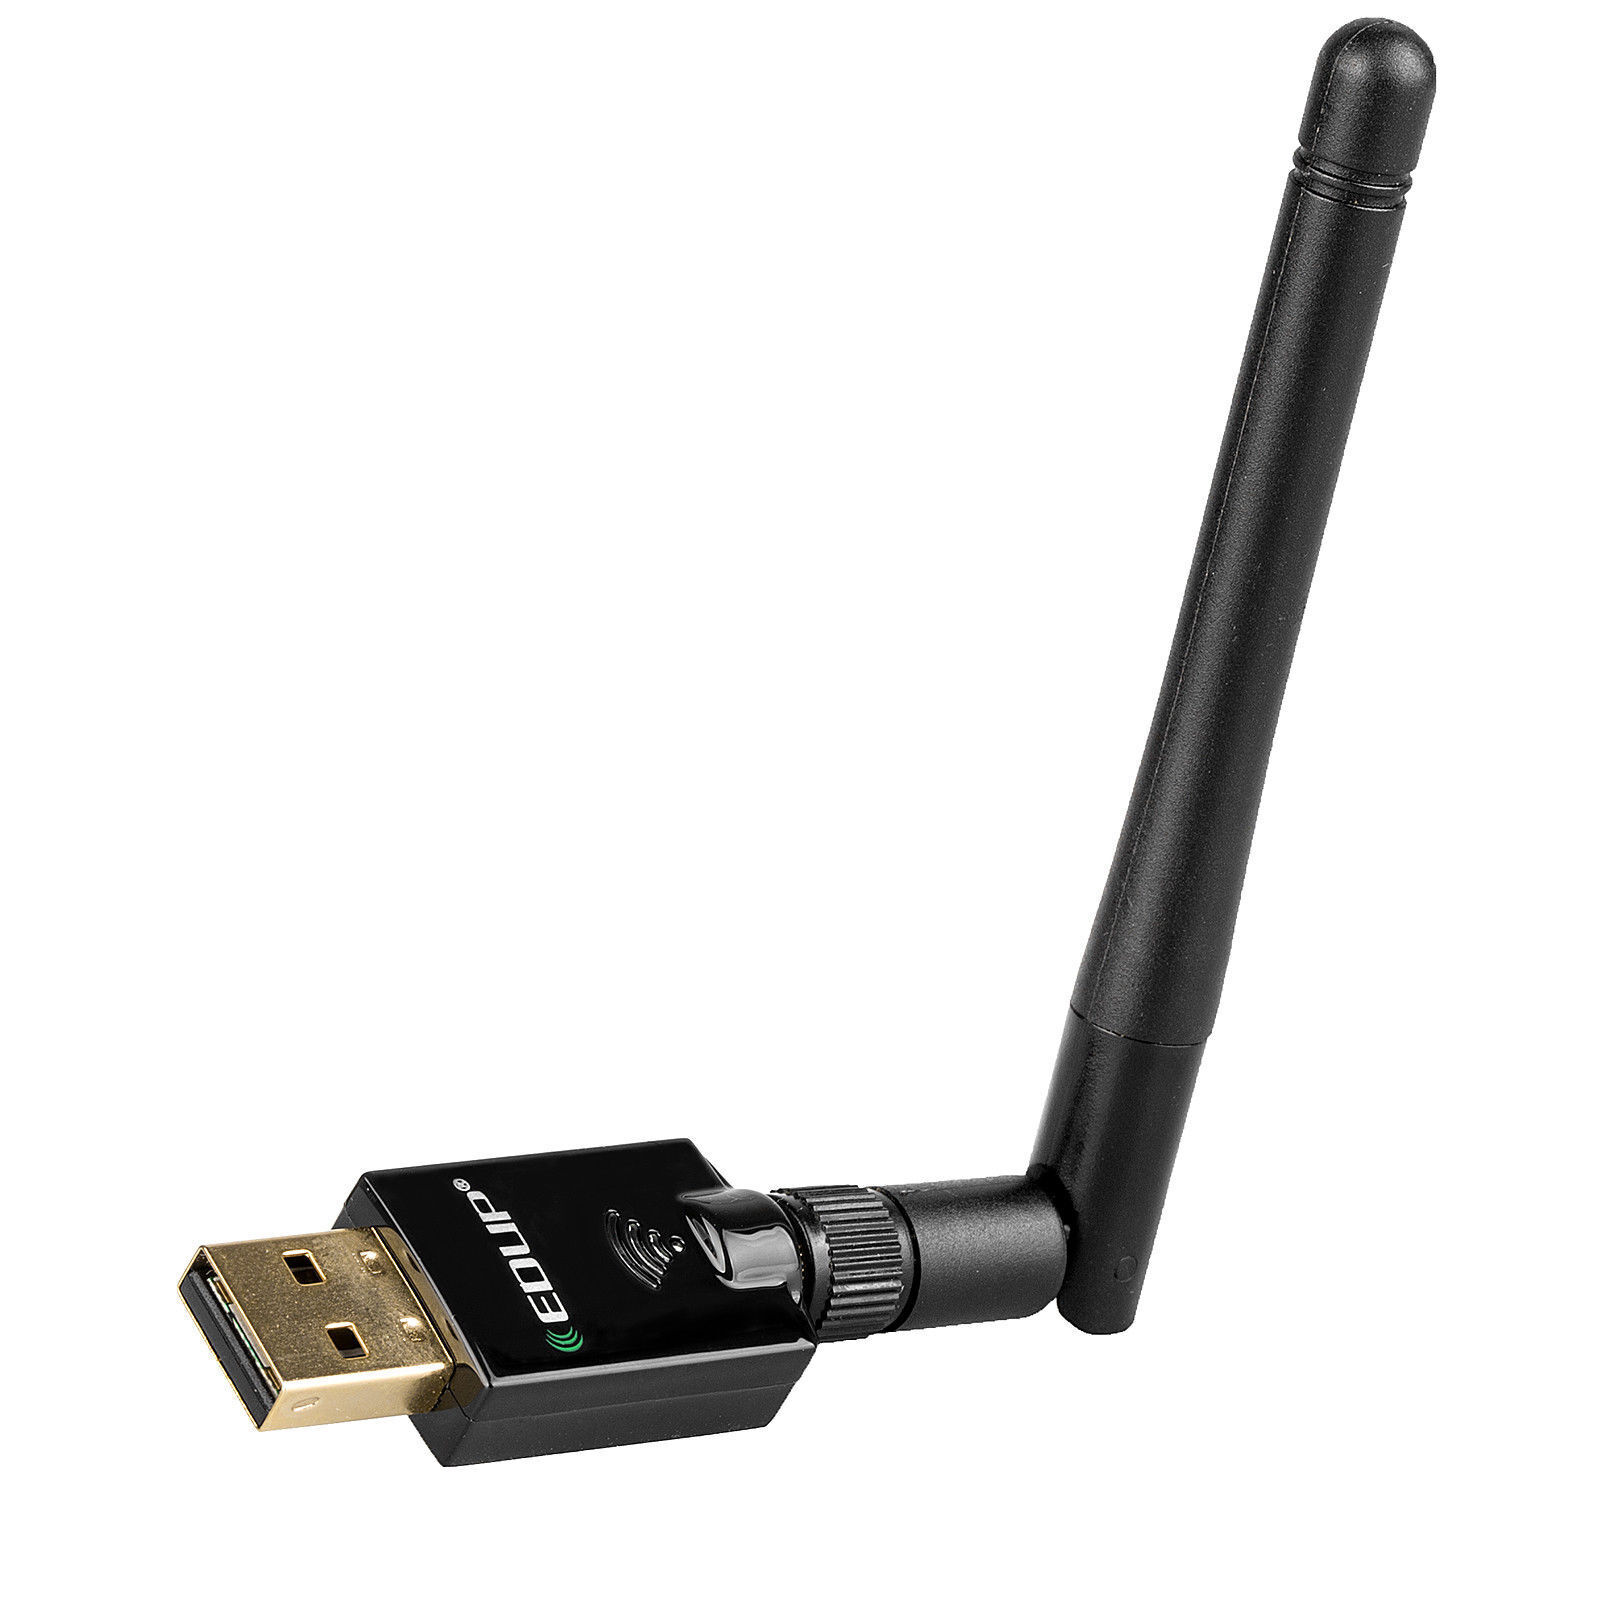 USB Wireless Adapter 600Mbps Dual Band WiFi Network 2.4GHz 5.8GHz Mini Portable